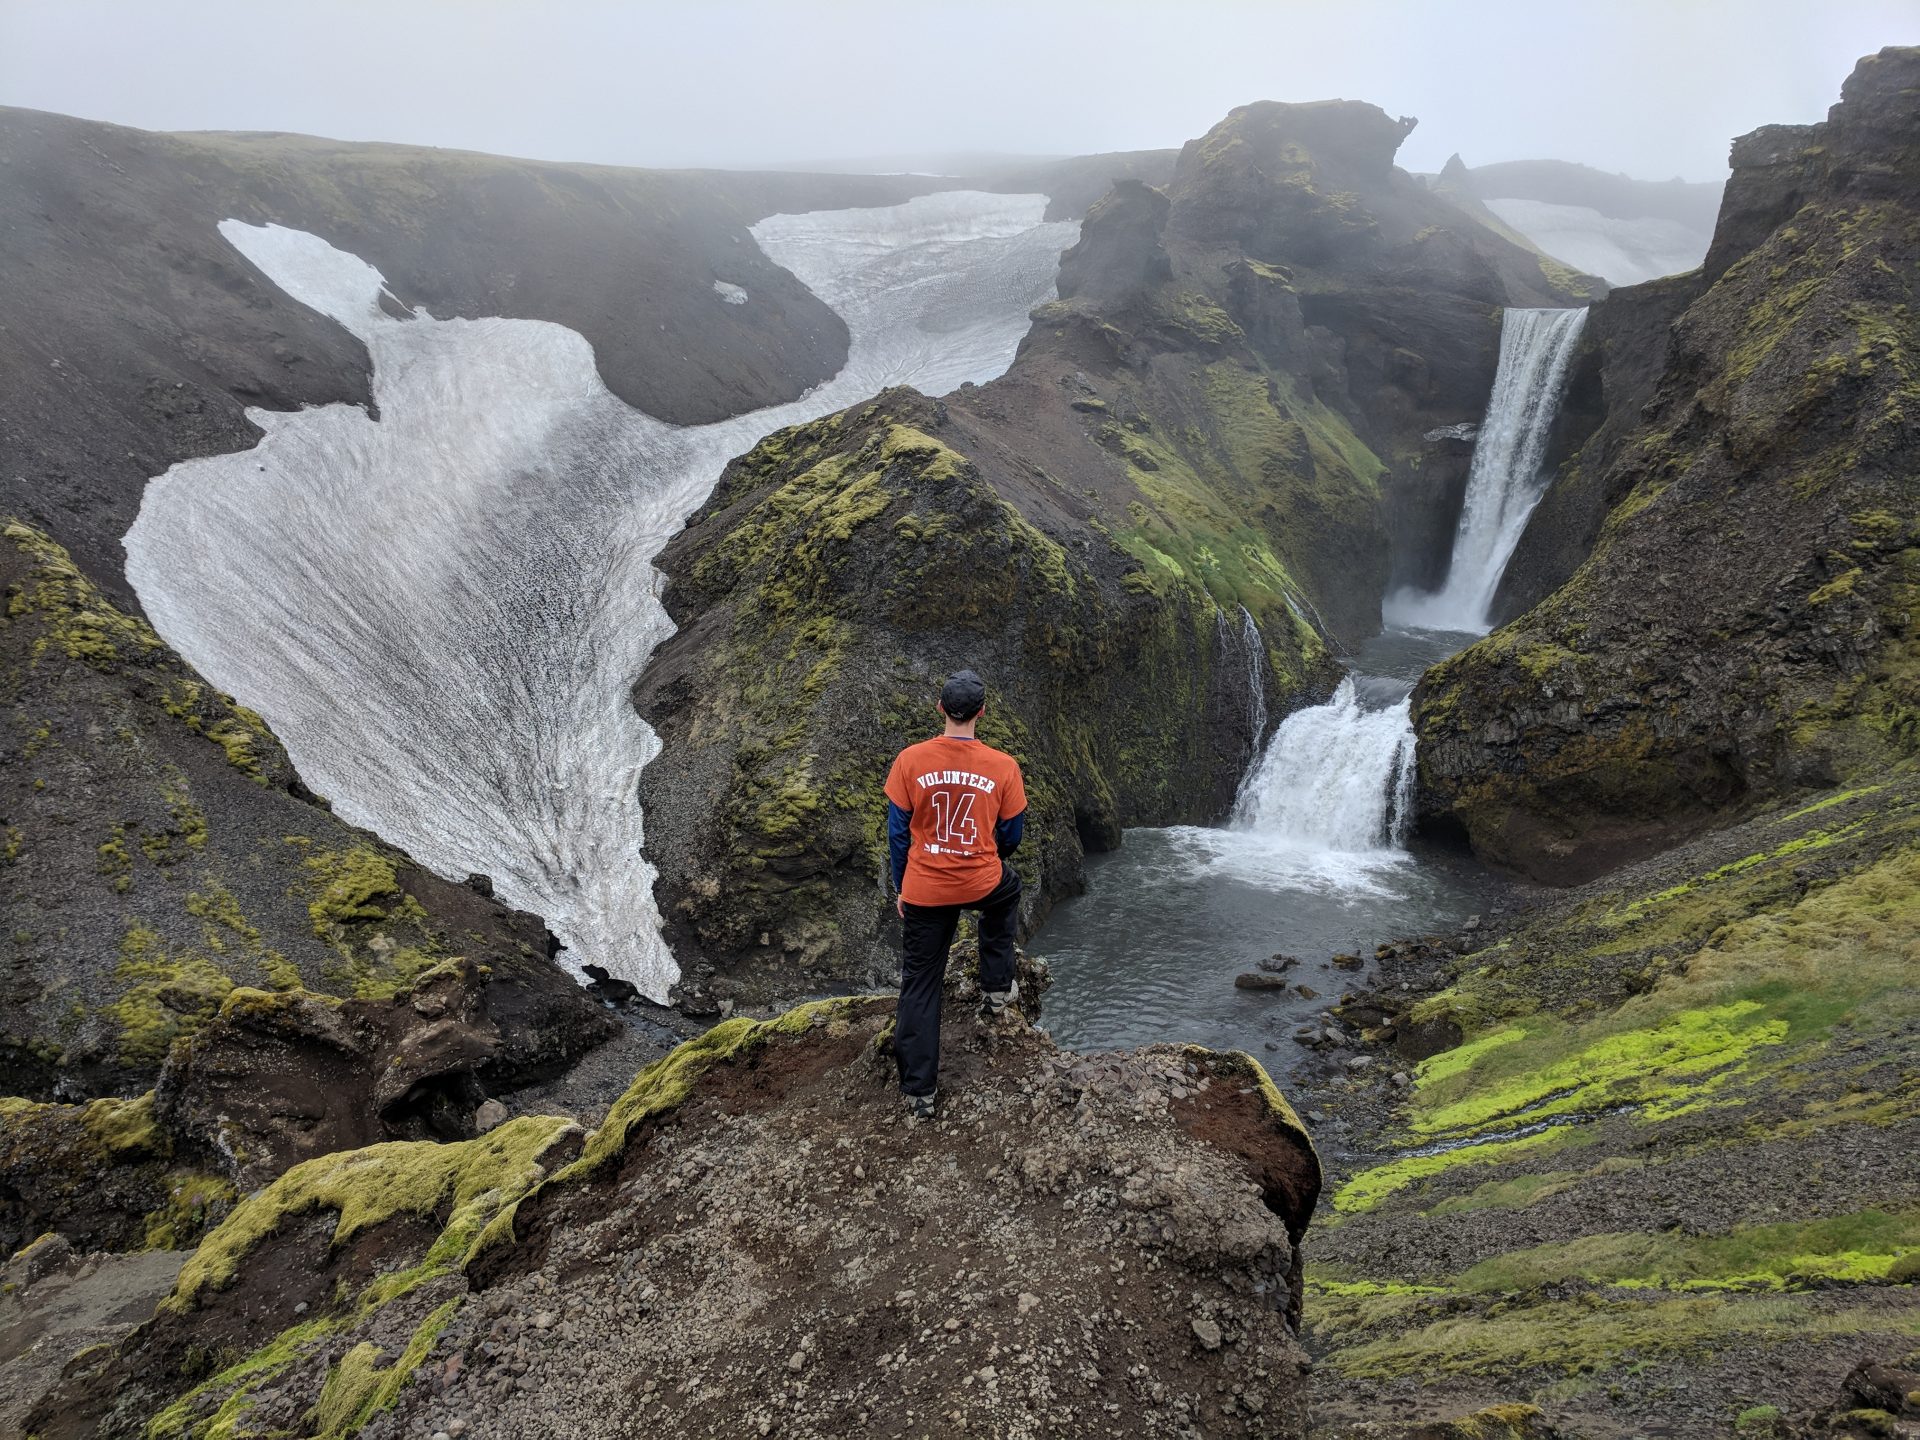 A hiker overlooking a tiered waterfall along the Fimmvorduhals trail in Iceland